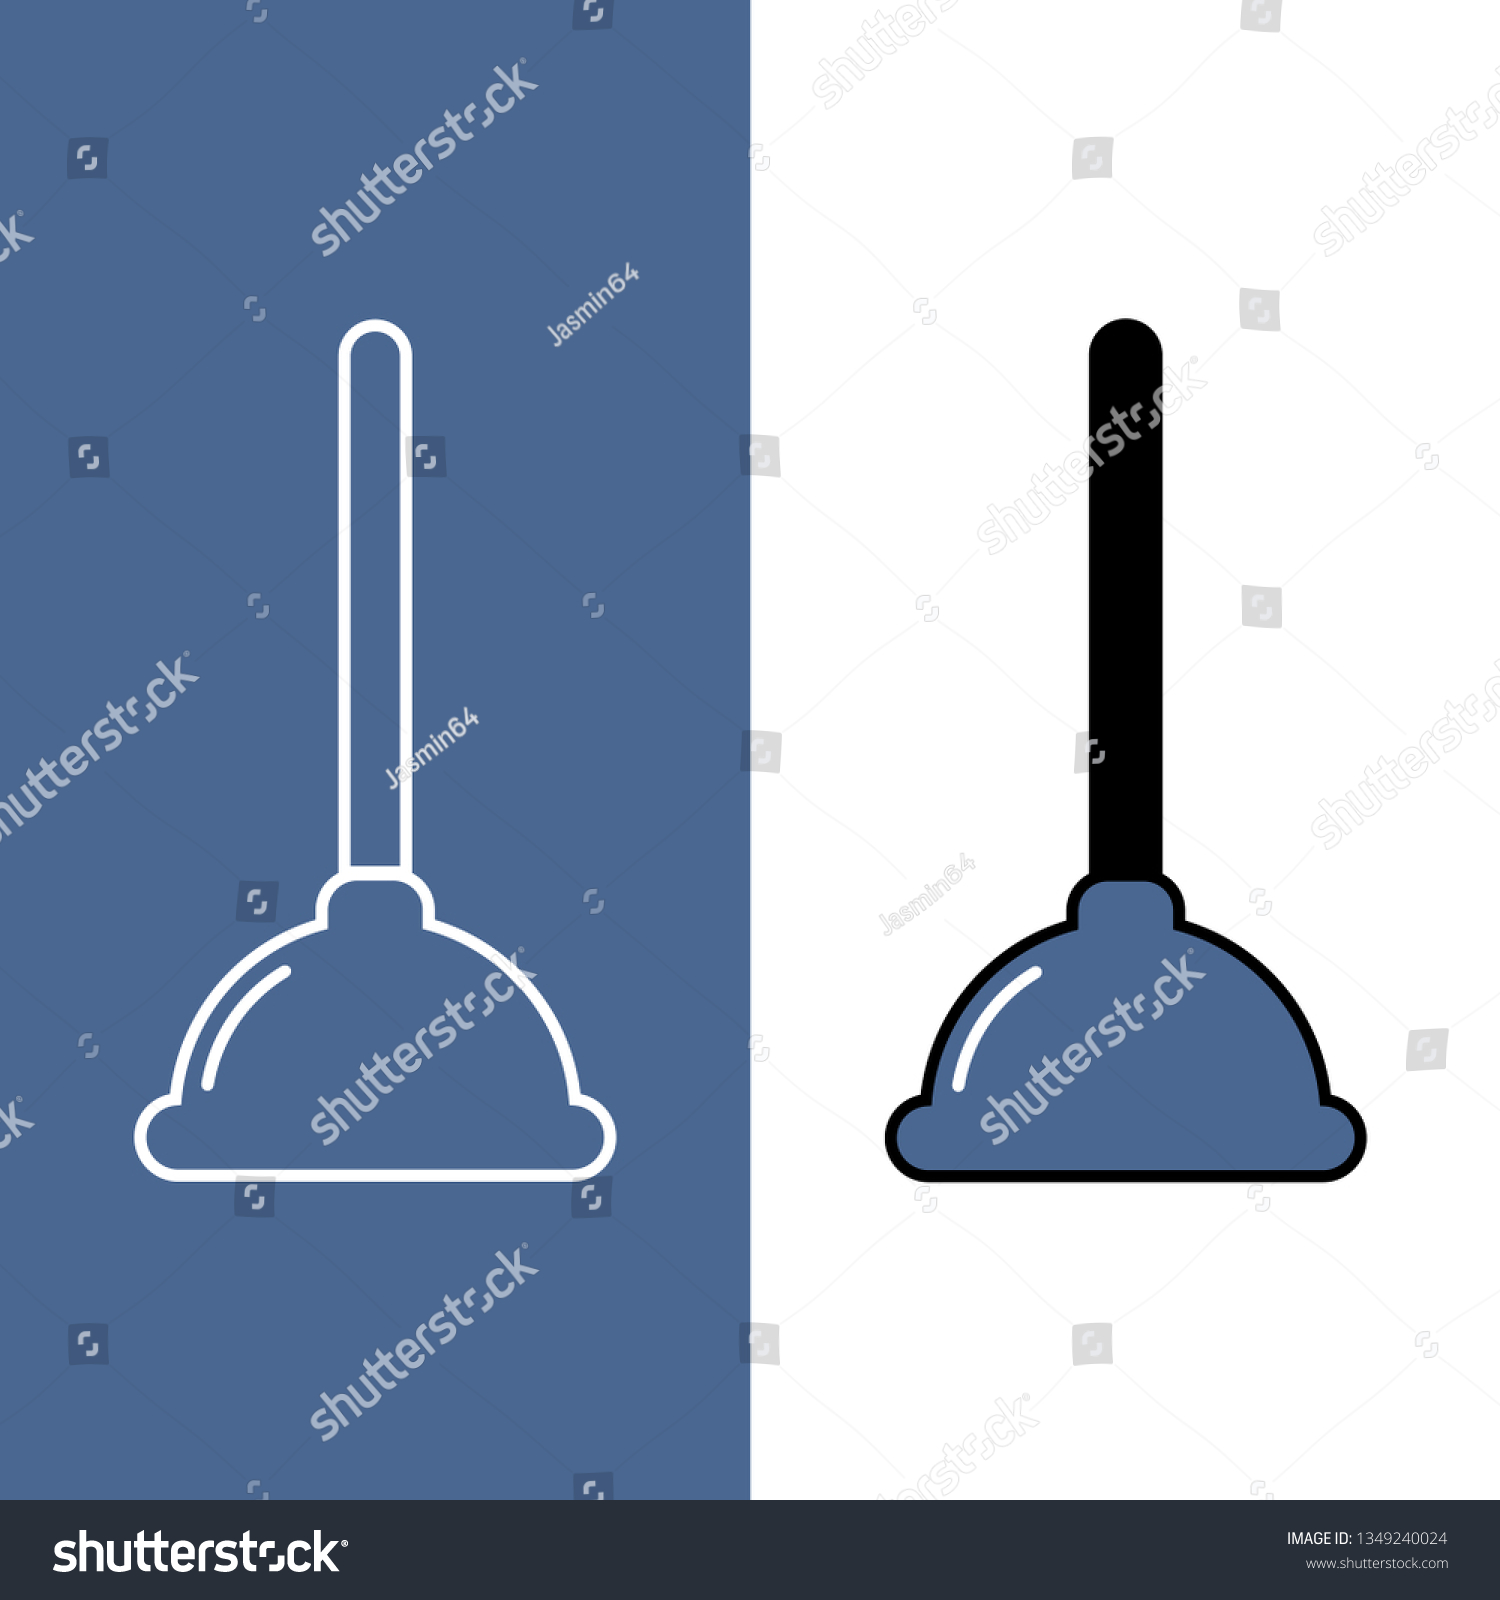 Plunger Icon Sign Toilet Plunger Vector Stock Vector Royalty Free Shutterstock